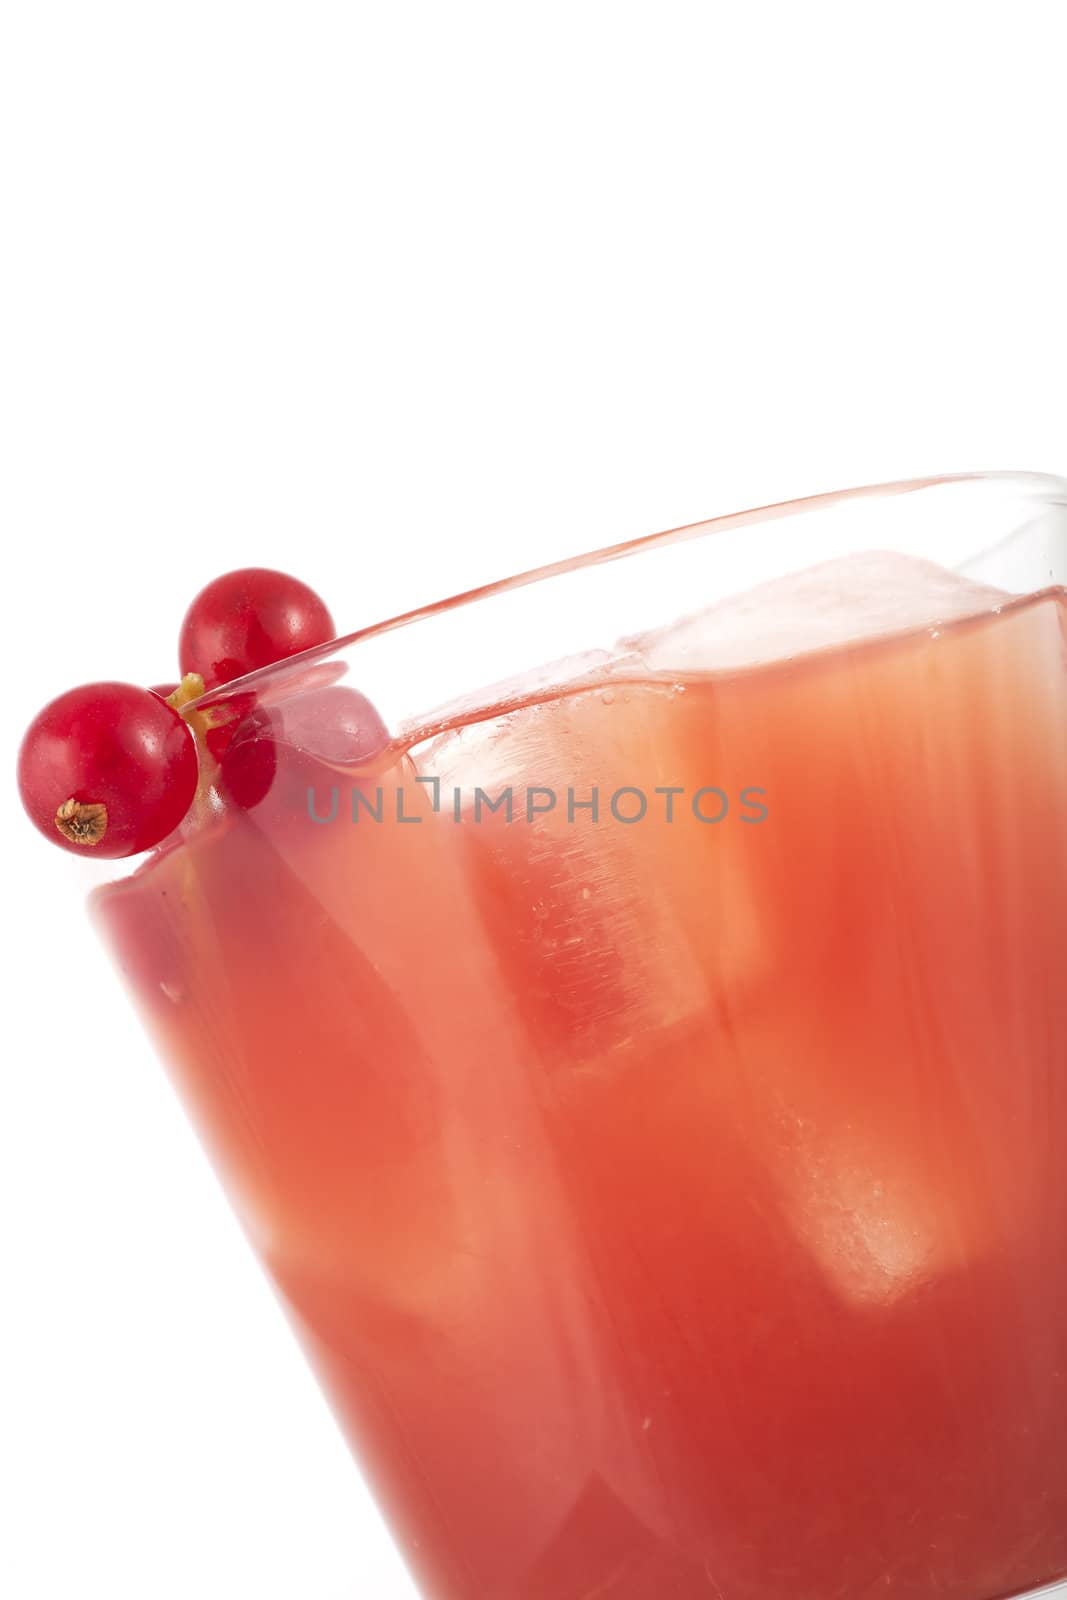 Fresh healthy red fruit juice with red currant garnish.